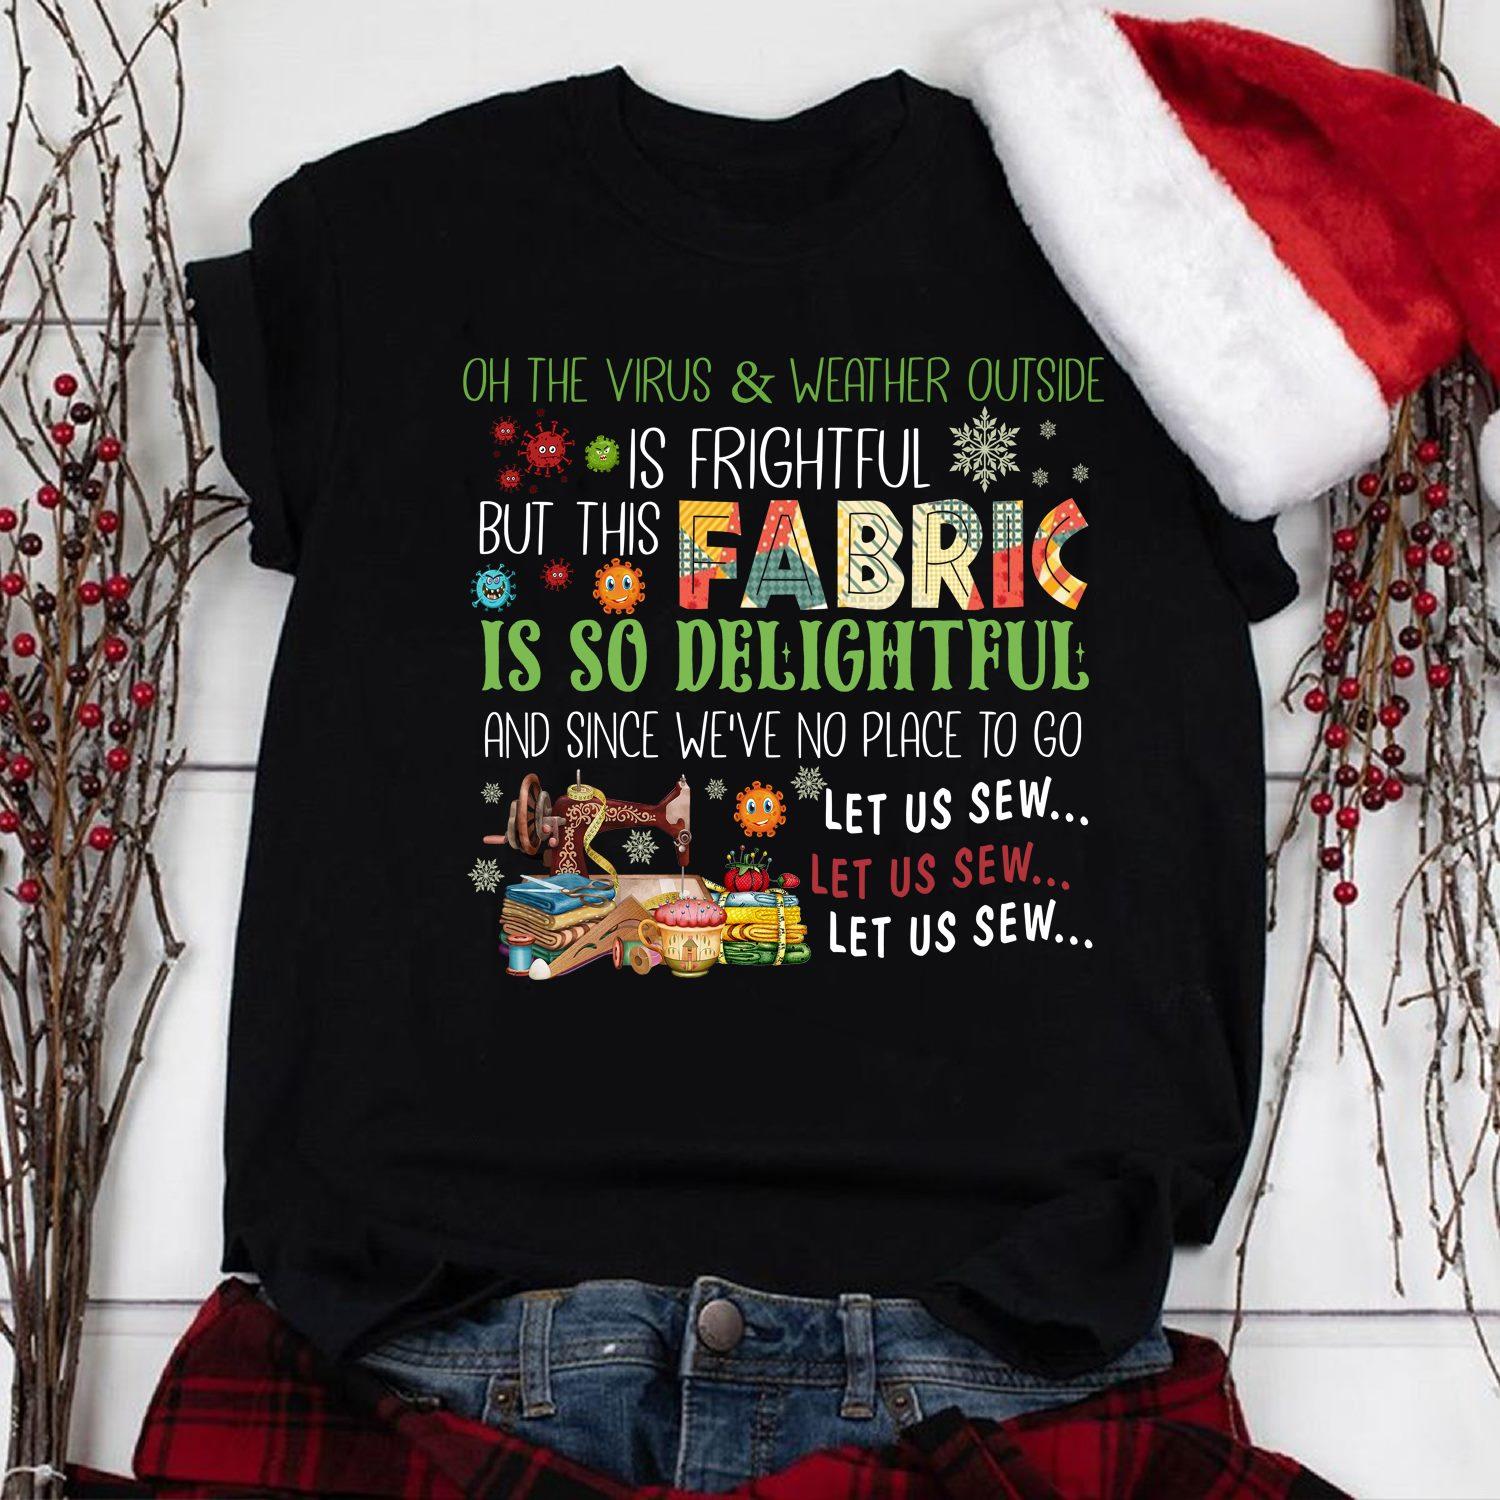 virus and weather outside is frightful, fabric is so delightful - Christmas gift for sewers, machine graphic Shirt, Hoodie, Sweatshirt - FridayStuff